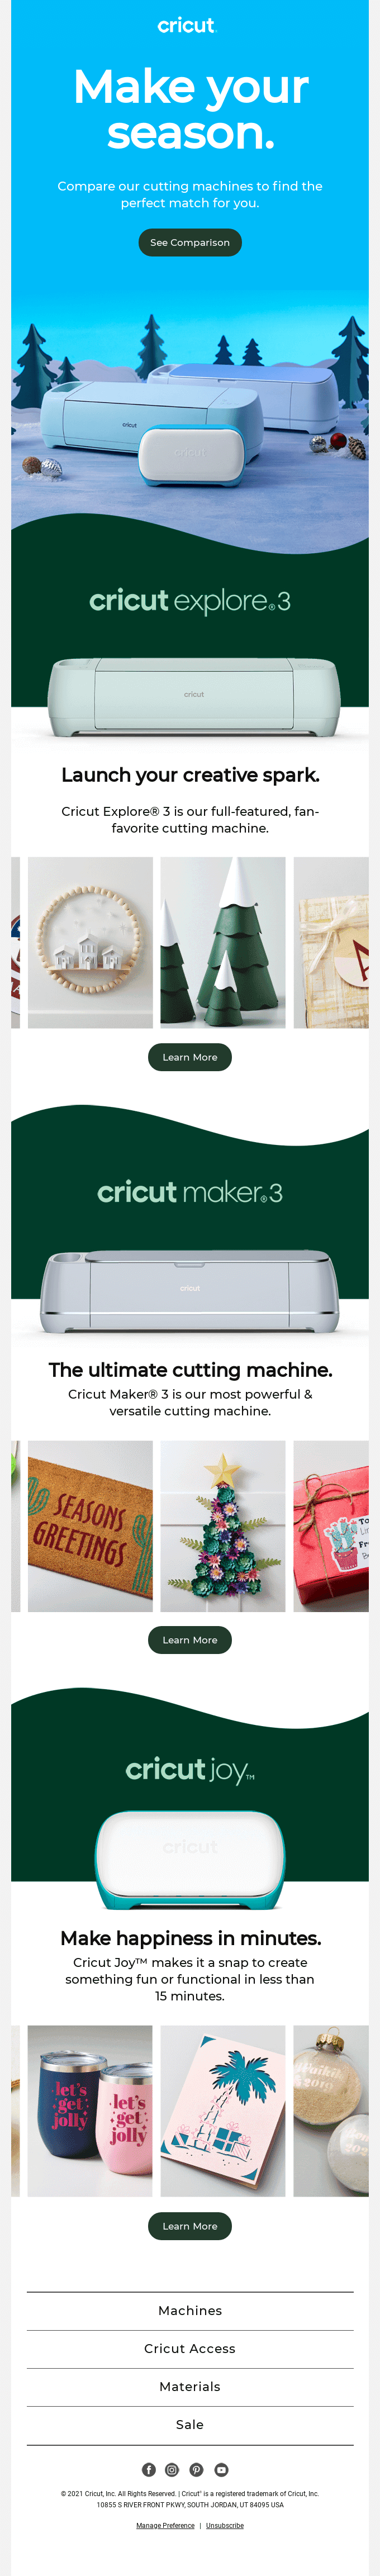 Say Hello to Our Cricut Machine Gift Guide